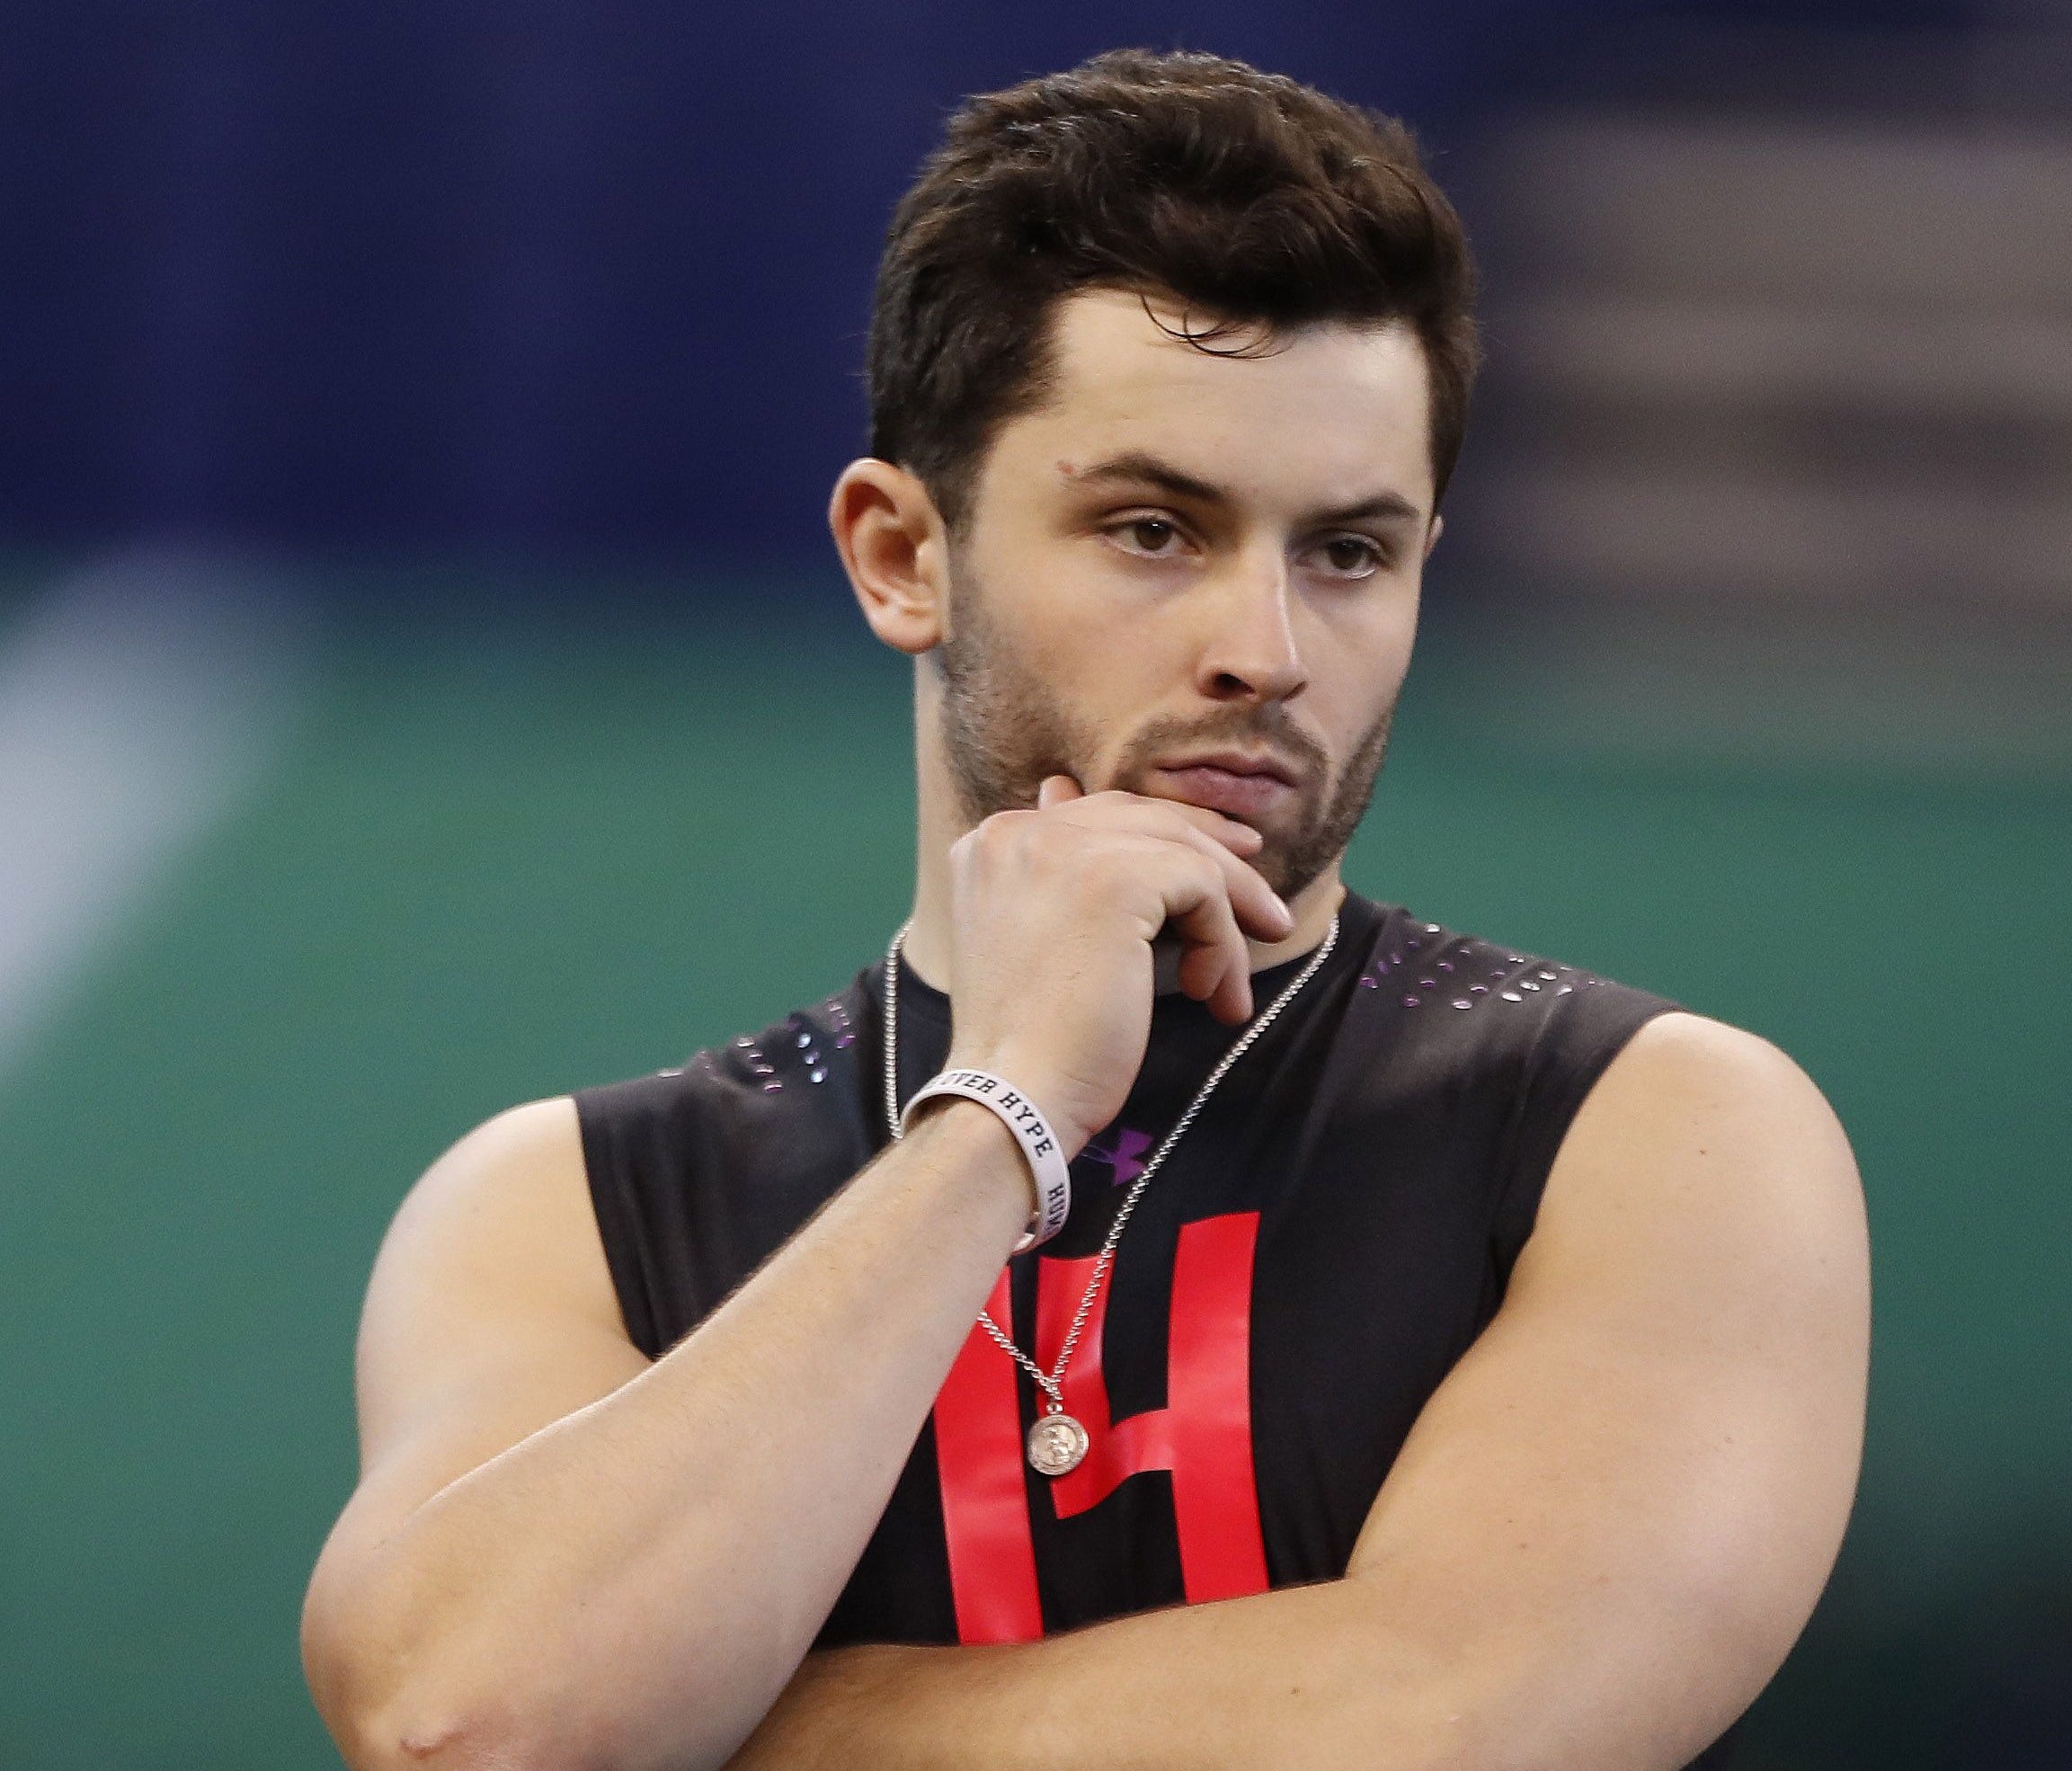 Oklahoma Sooners quarterback Baker Mayfield waits to go through passing drills during the 2018 NFL Combine at Lucas Oil Stadium.